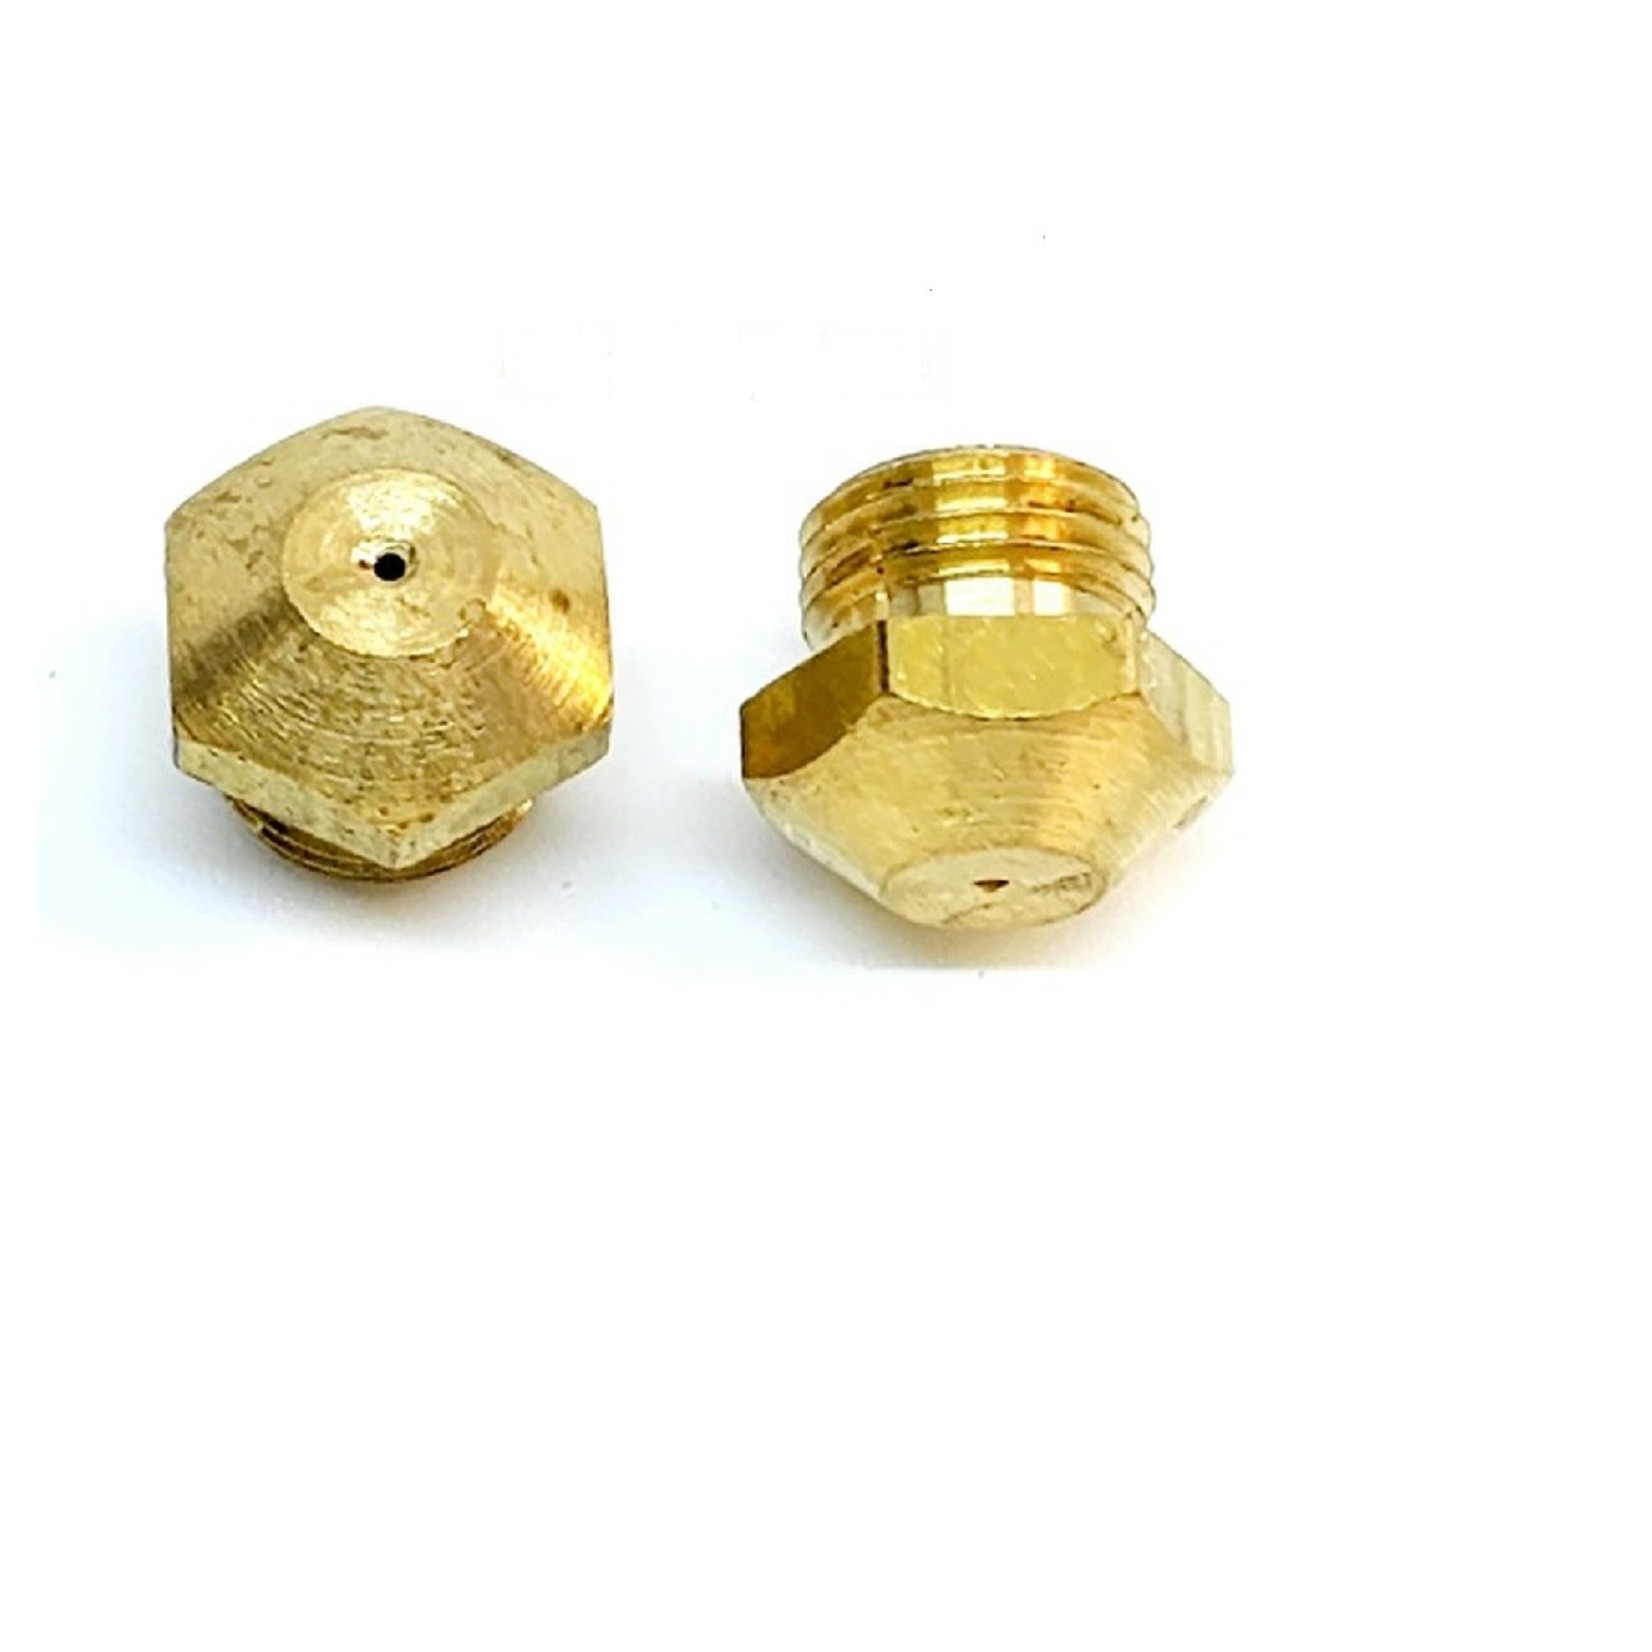 Pro Forge Brass Gas Jet, pair